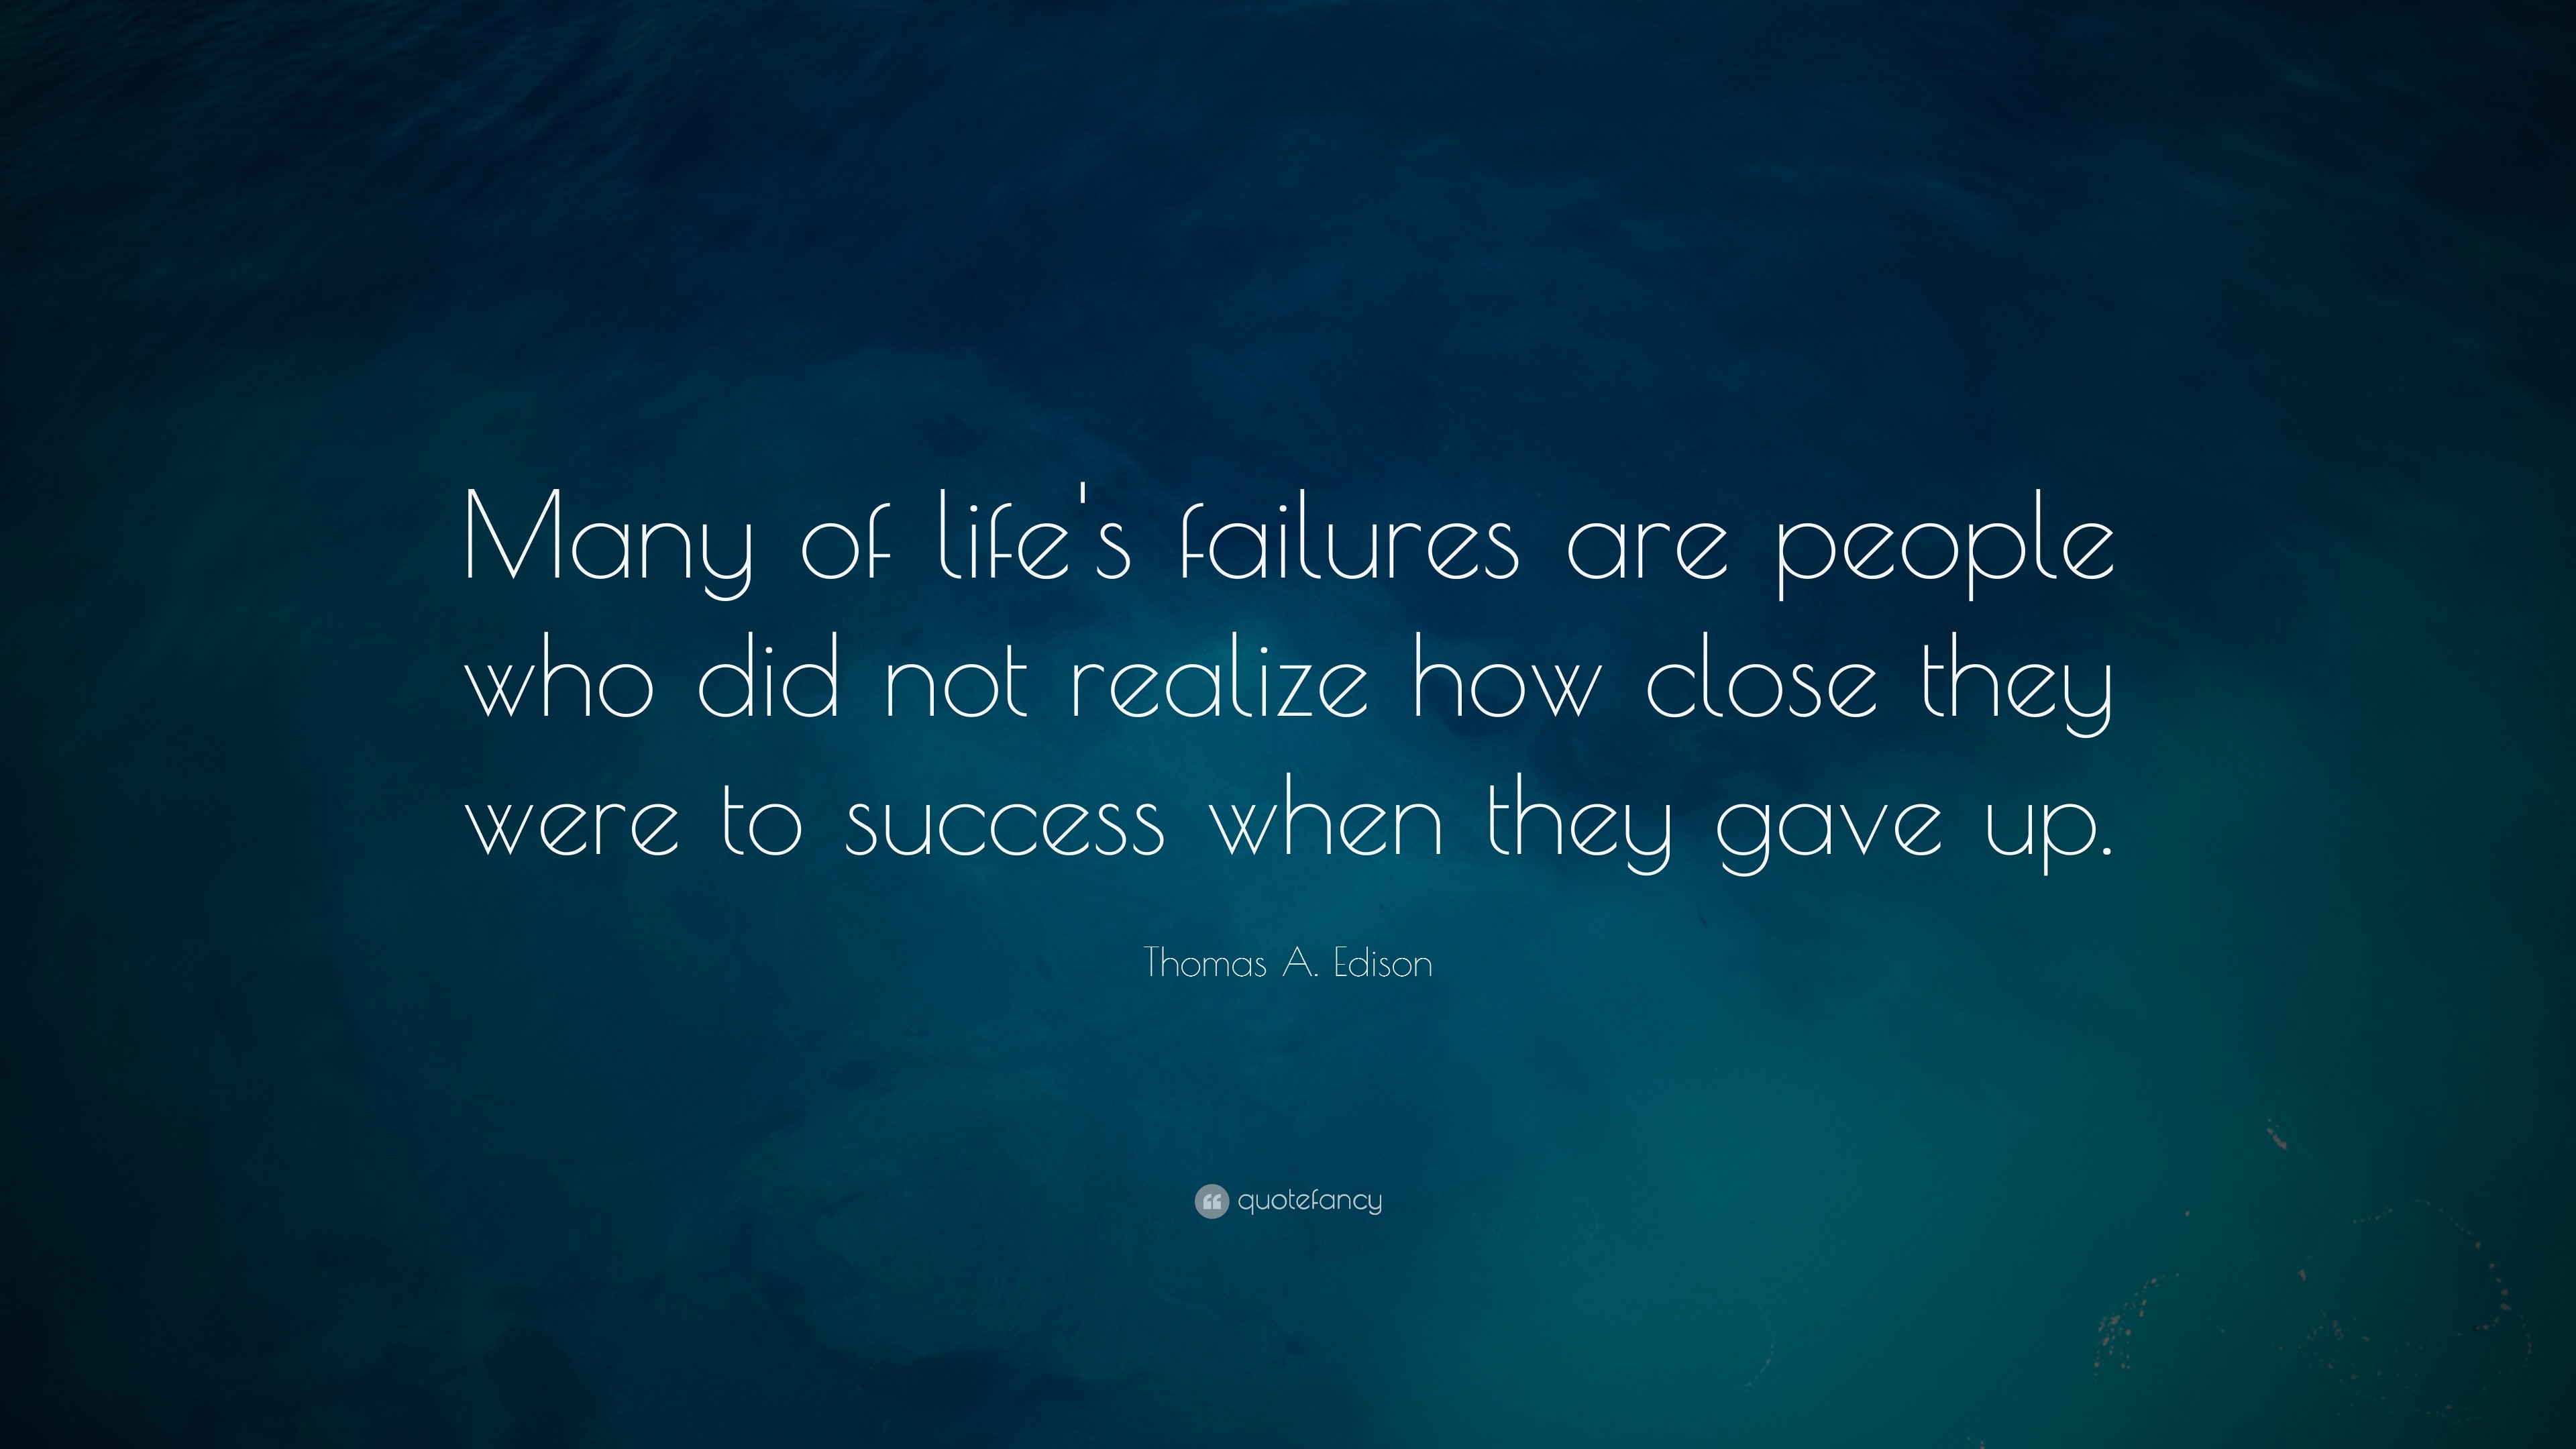 3840x2160 Success Quotes: “Many of life's failures are people who did not realize how  close